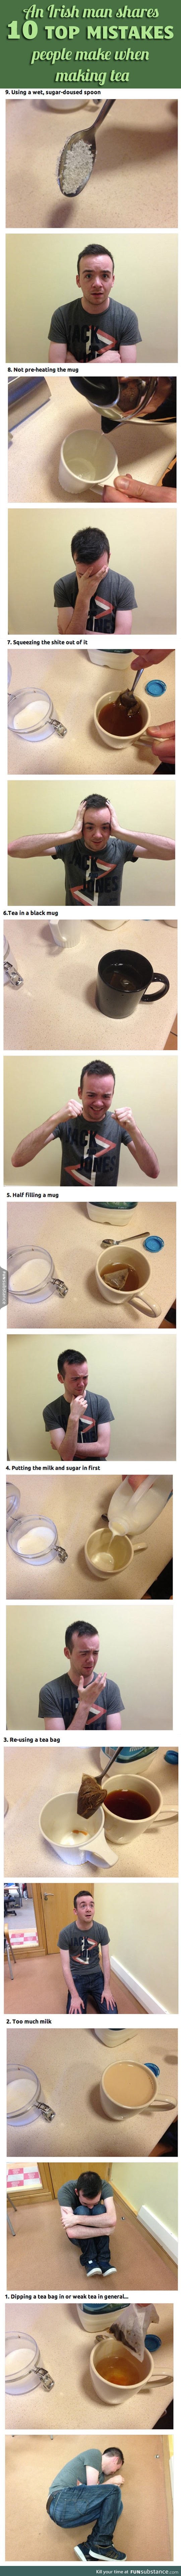 Mistakes people make when making tea